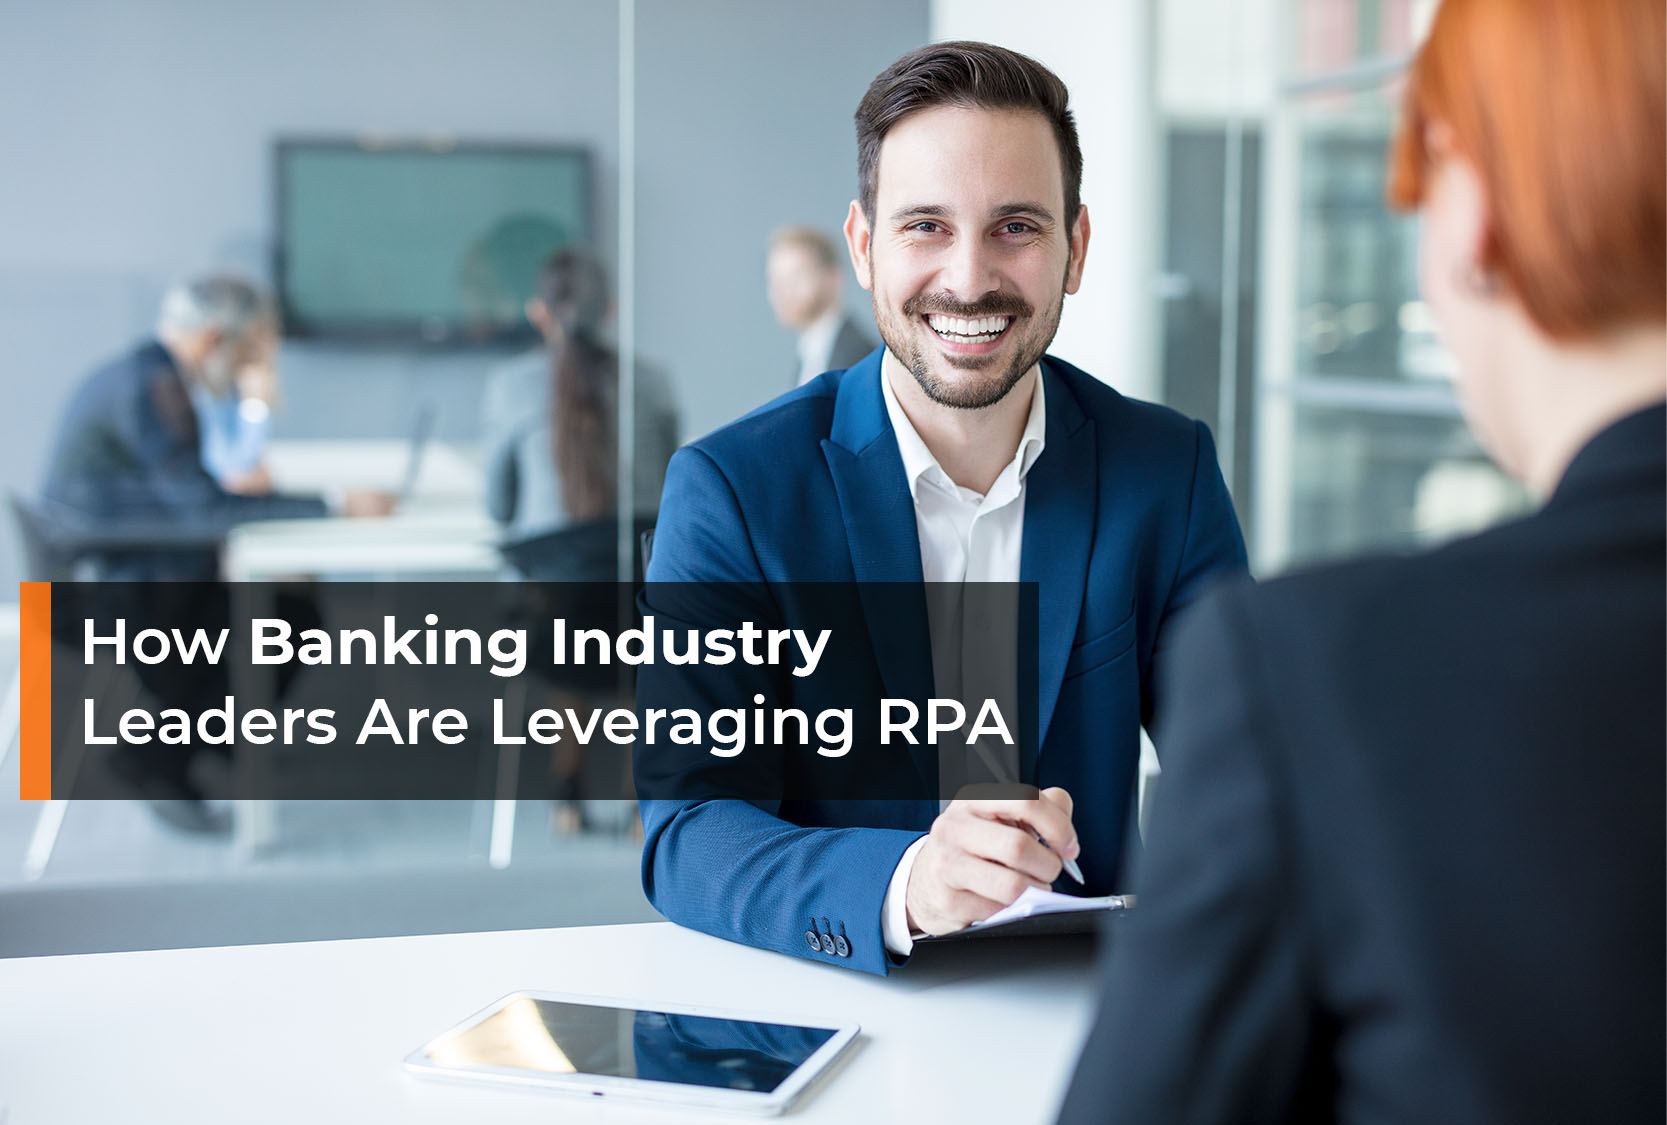 How Banking Industry Leaders Are Leveraging RPA